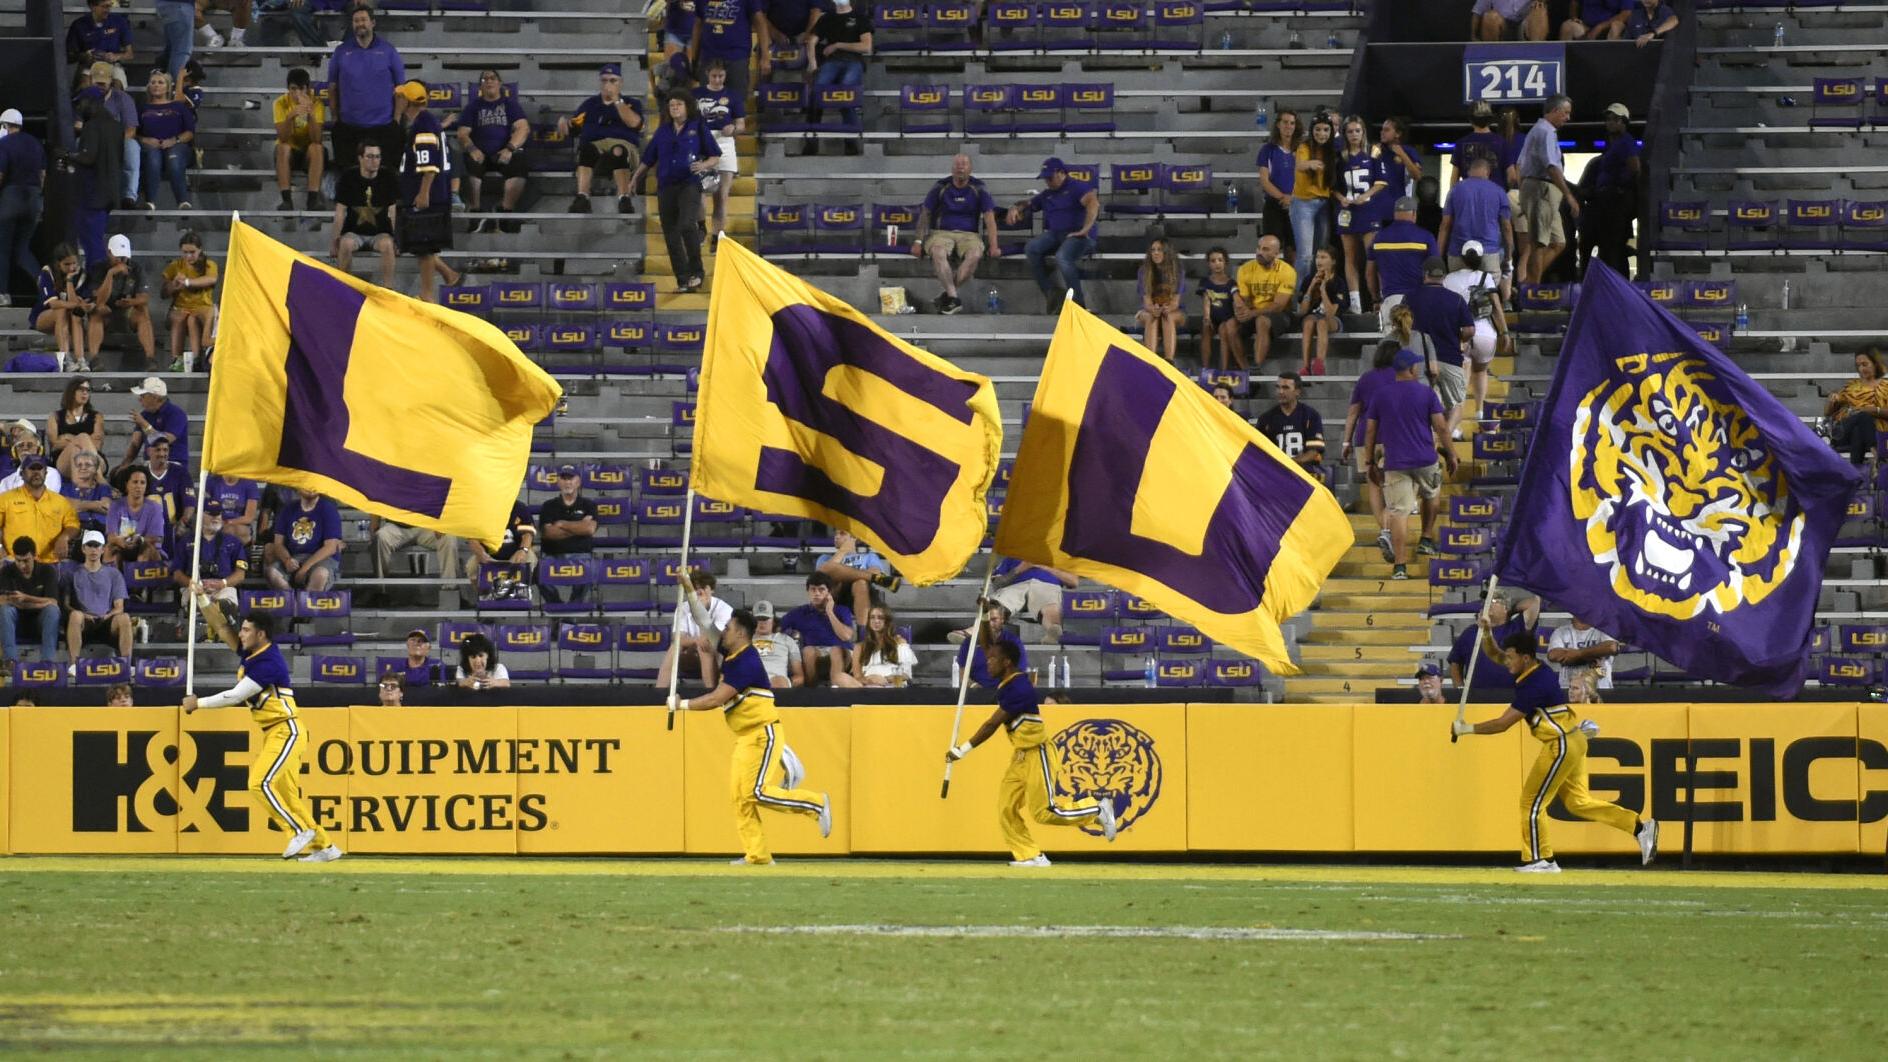 Lsu Schedule Football 2022 Ready For 2022? Lsu Football Schedule Released; See The Tigers' Key Dates,  Opponents | Lsu | Theadvocate.com